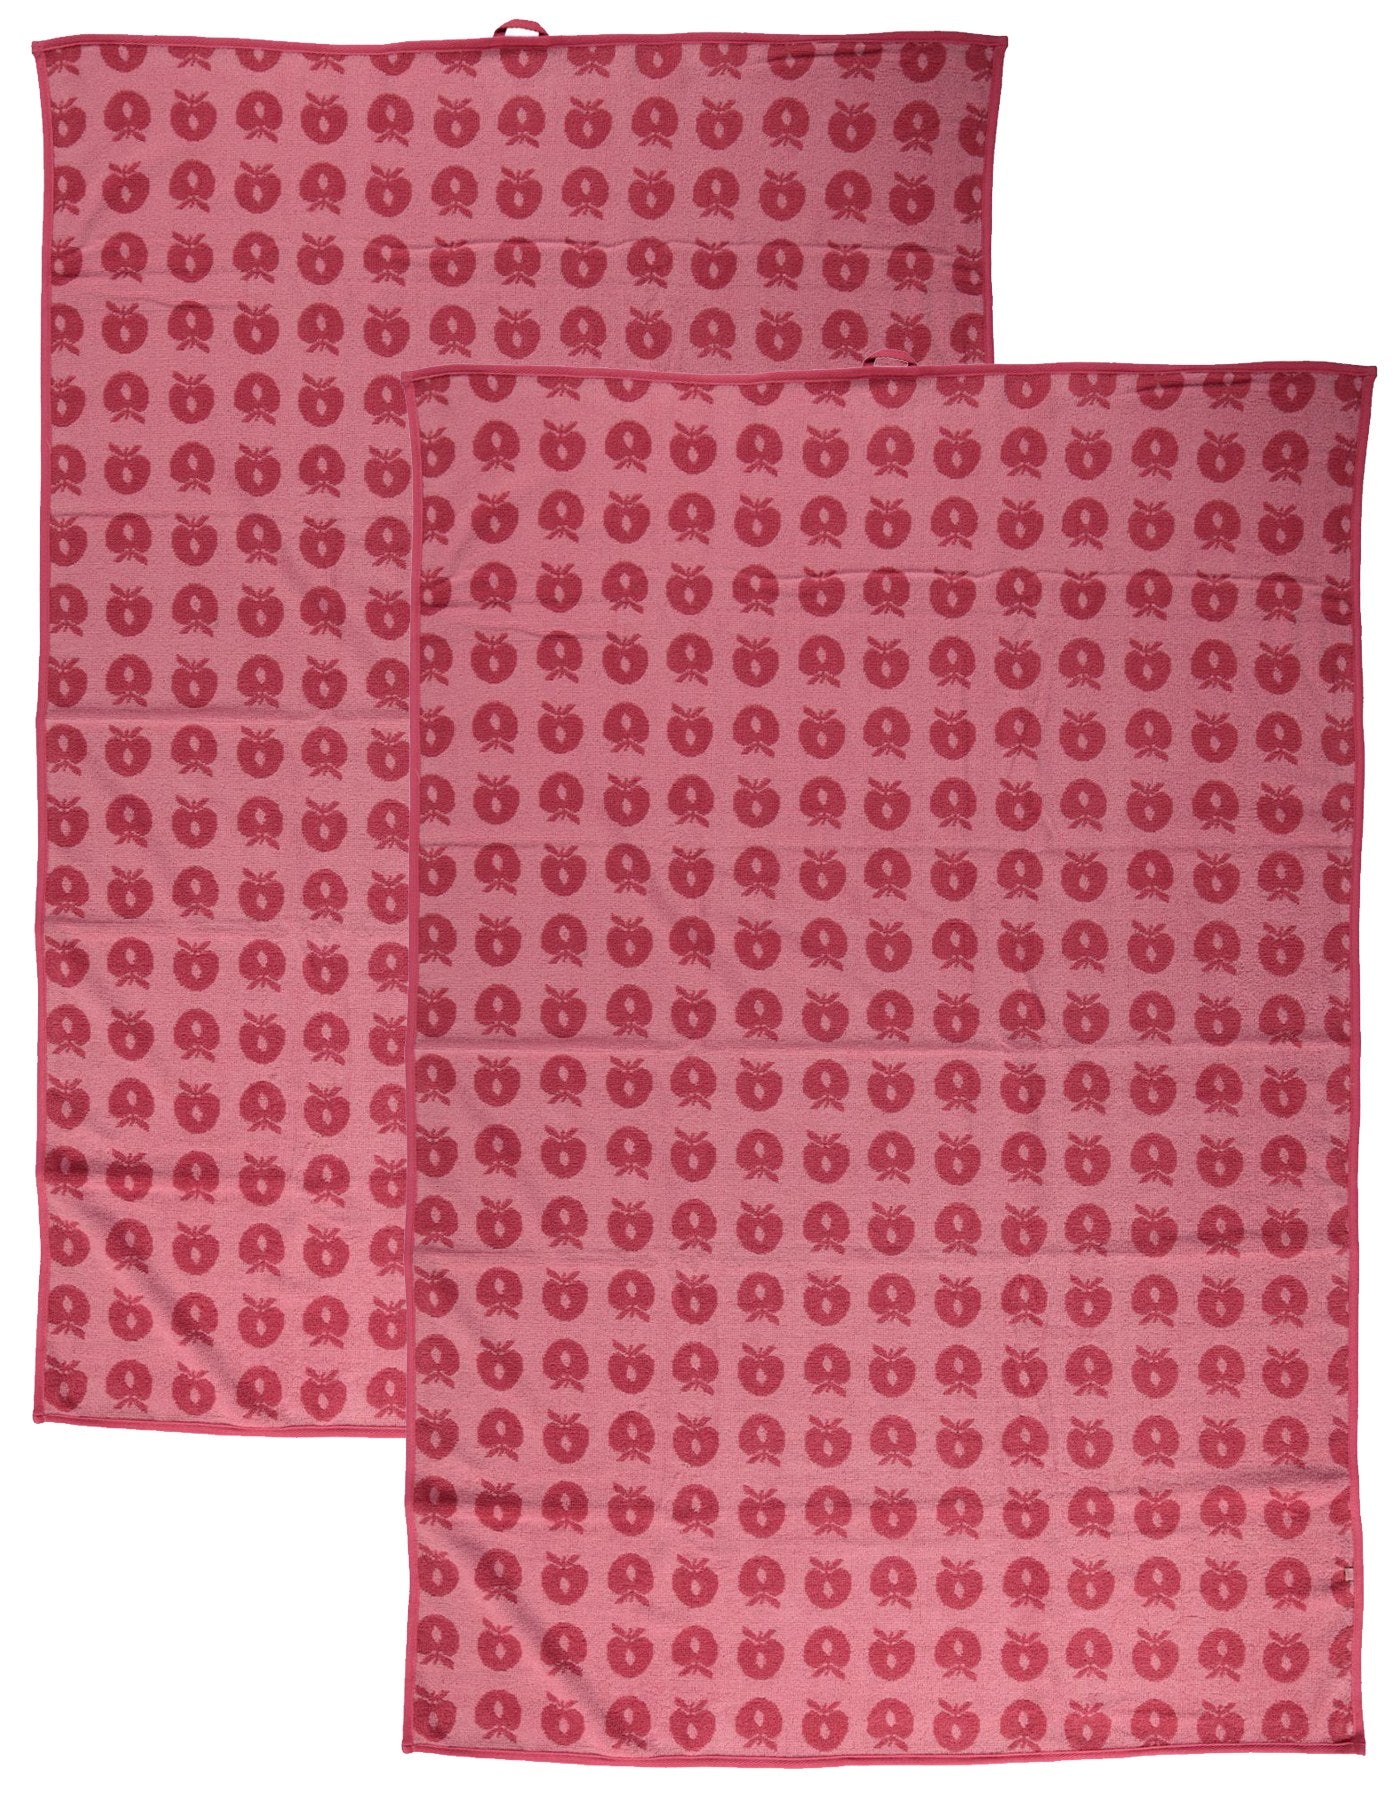 2 pack towel 100x150 with apples